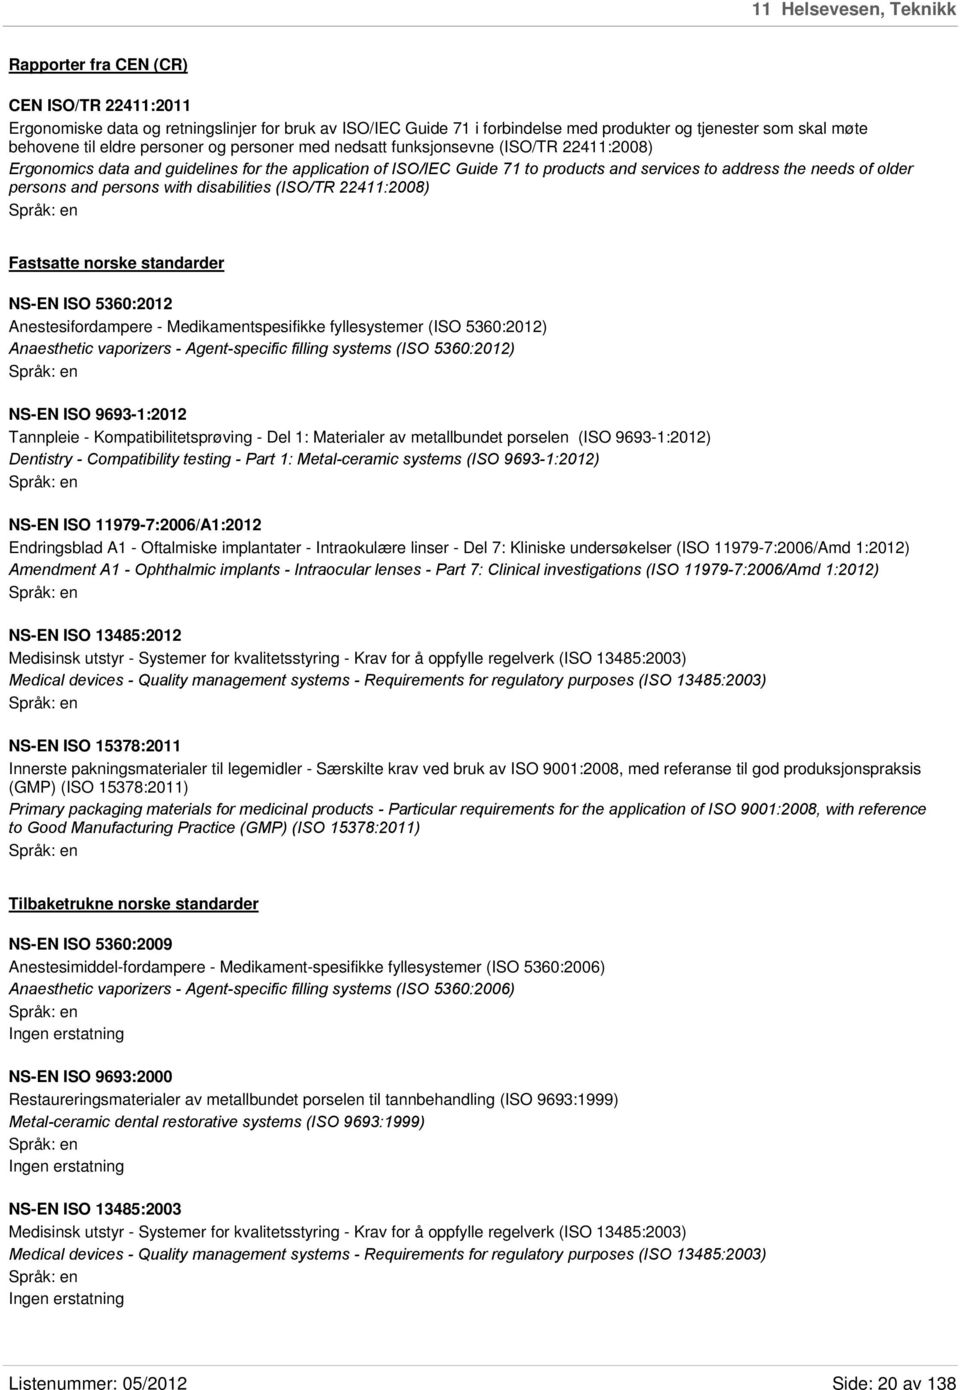 persons and persons with disabilities (ISO/TR 22411:2008) Fastsatte norske standarder NS-EN ISO 5360:2012 Anestesifordampere - Medikamentspesifikke fyllesystemer (ISO 5360:2012) Anaesthetic